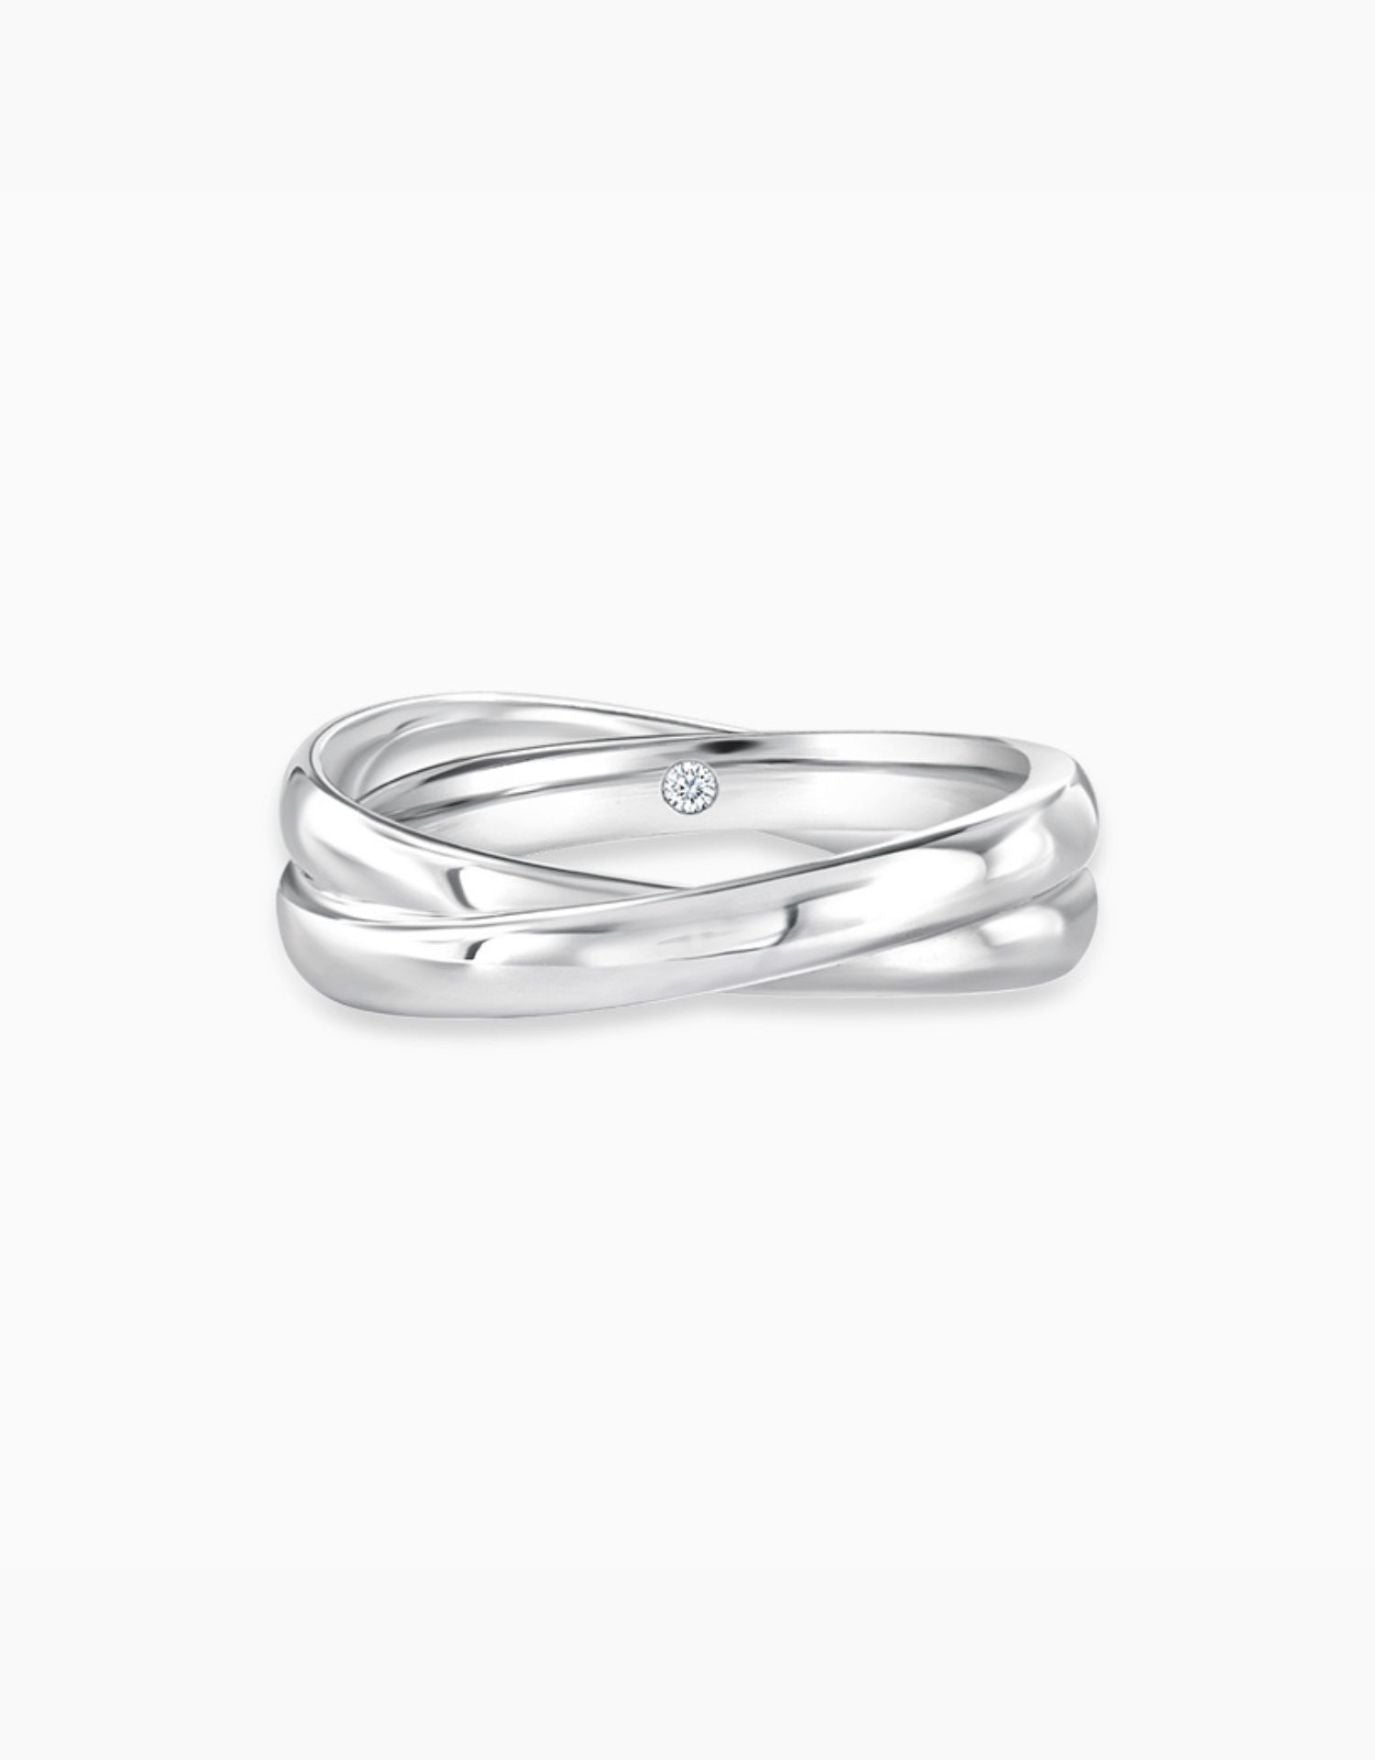 LVC Purete Intertwined Wedding Band in Glossy Finish in Platinum